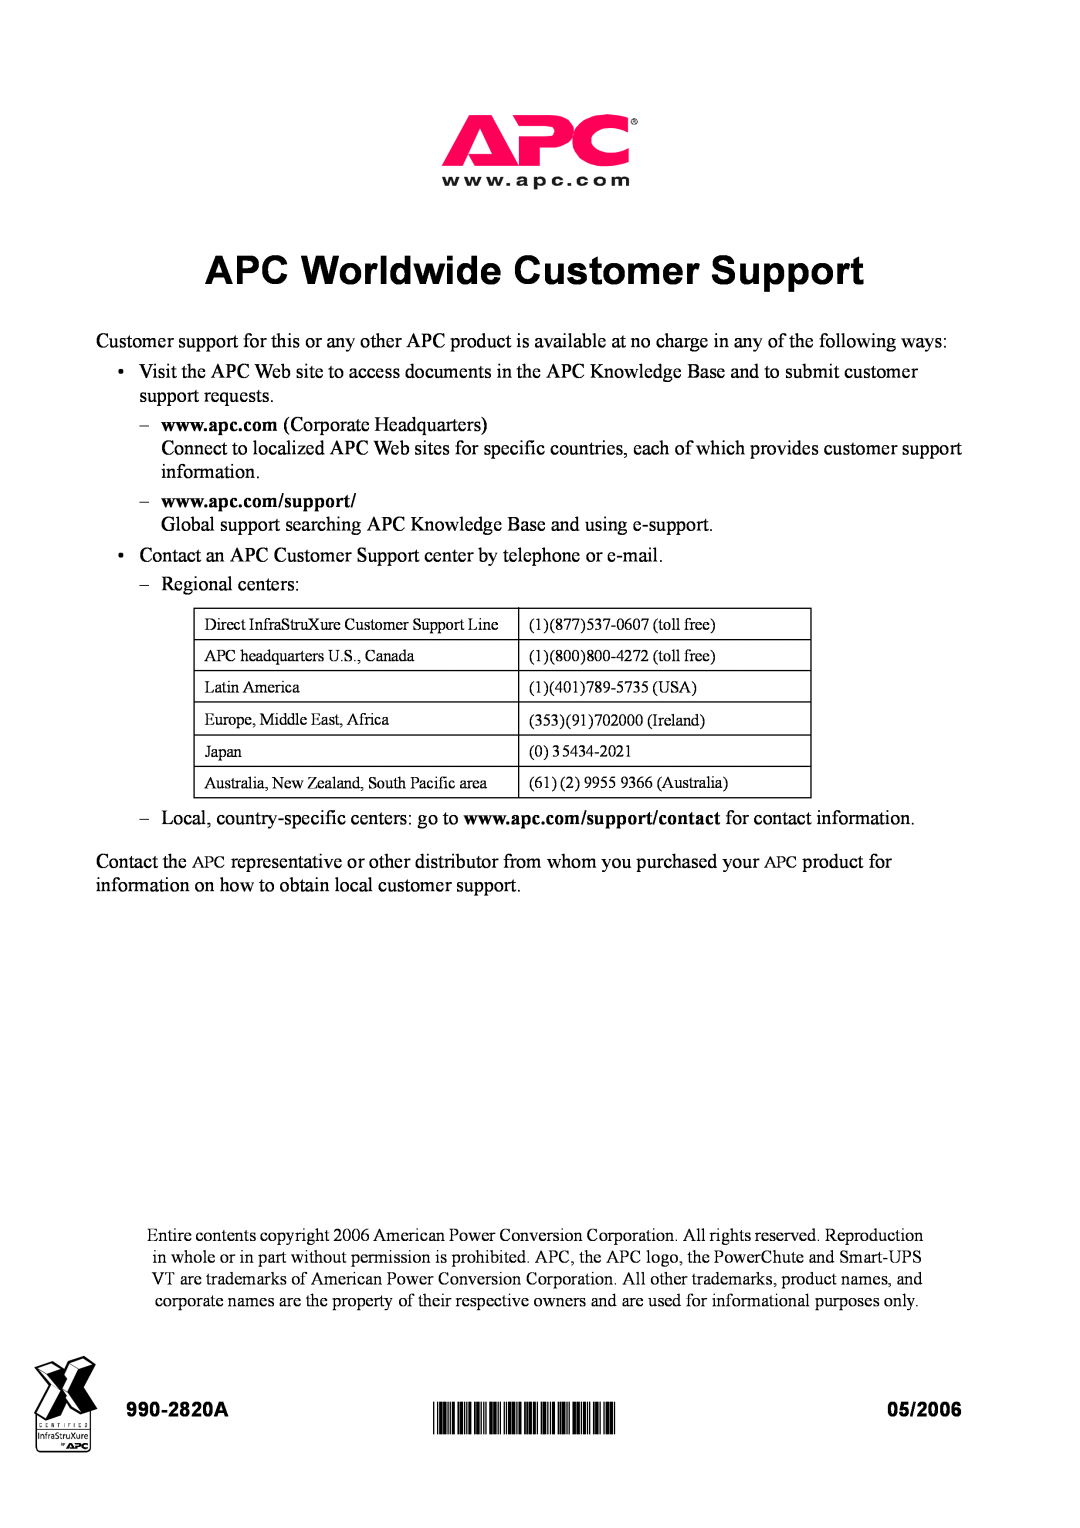 American Power Conversion VT ISX manual APC Worldwide Customer Support, 990-2820A, 05/2006 